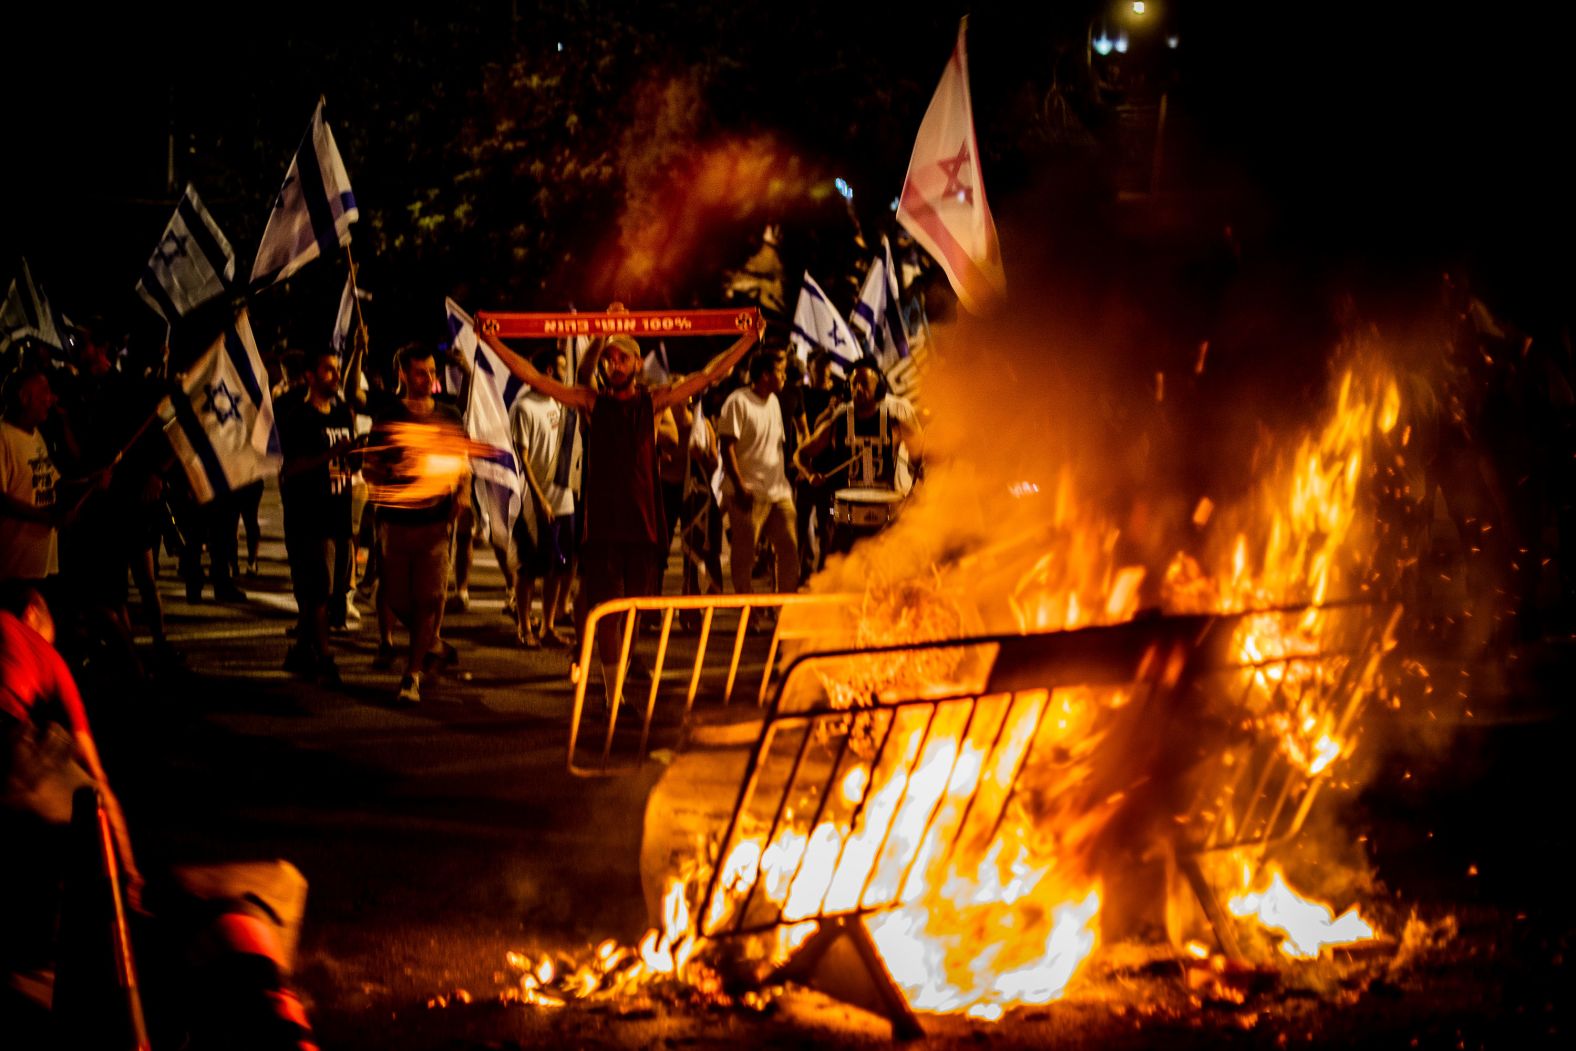 People protest next to a bonfire in Tel Aviv on Thursday, July 20.